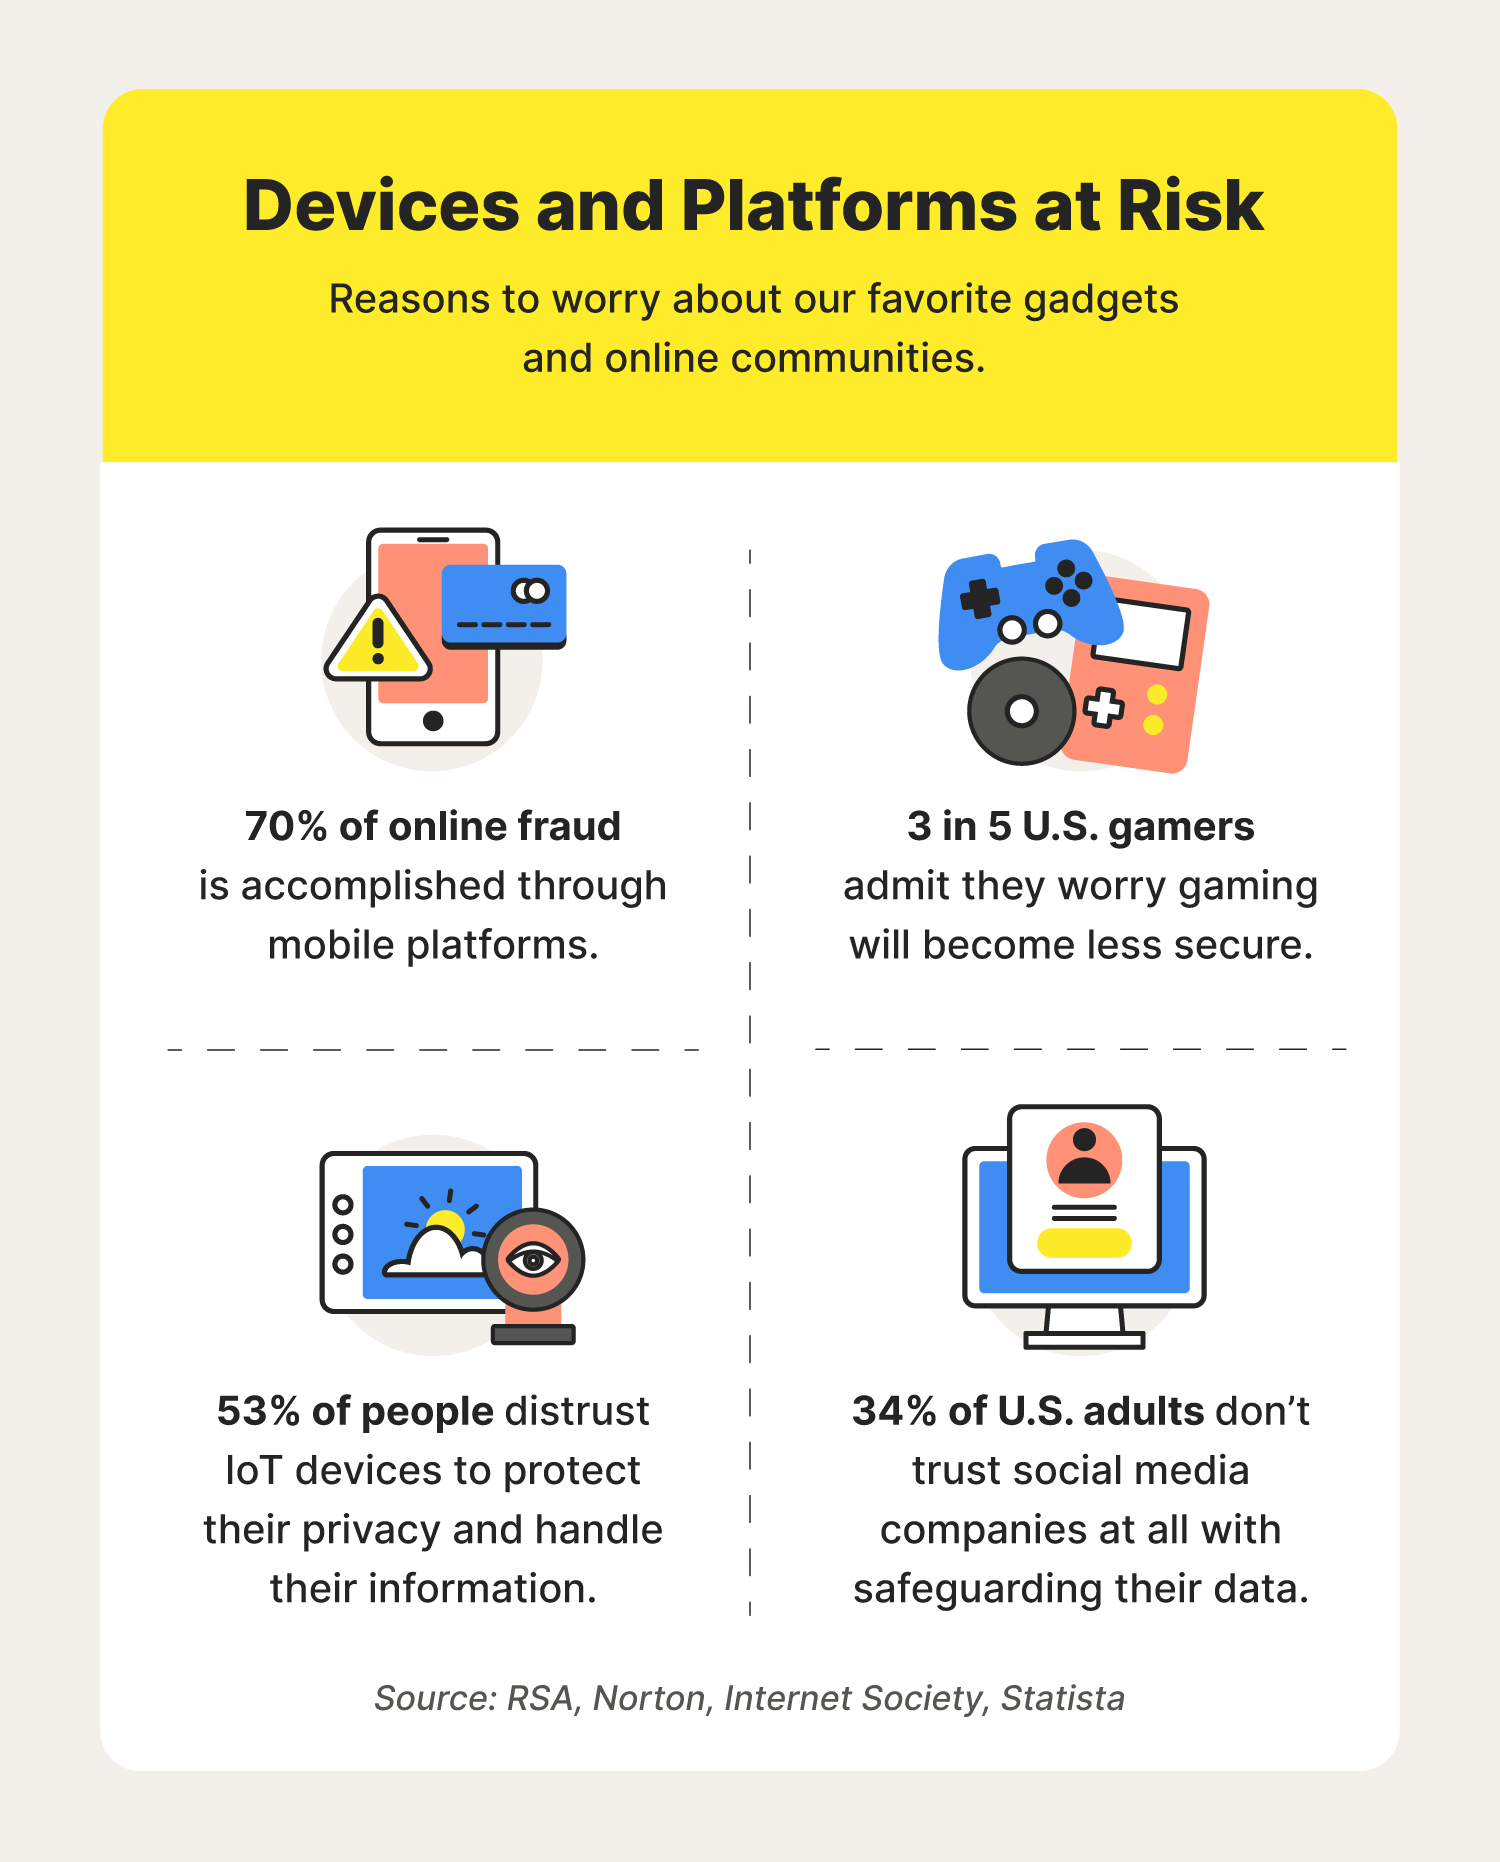 A graphic illustrates cybersecurity statistics related to the specific devices and platforms at risk of cyberattacks.